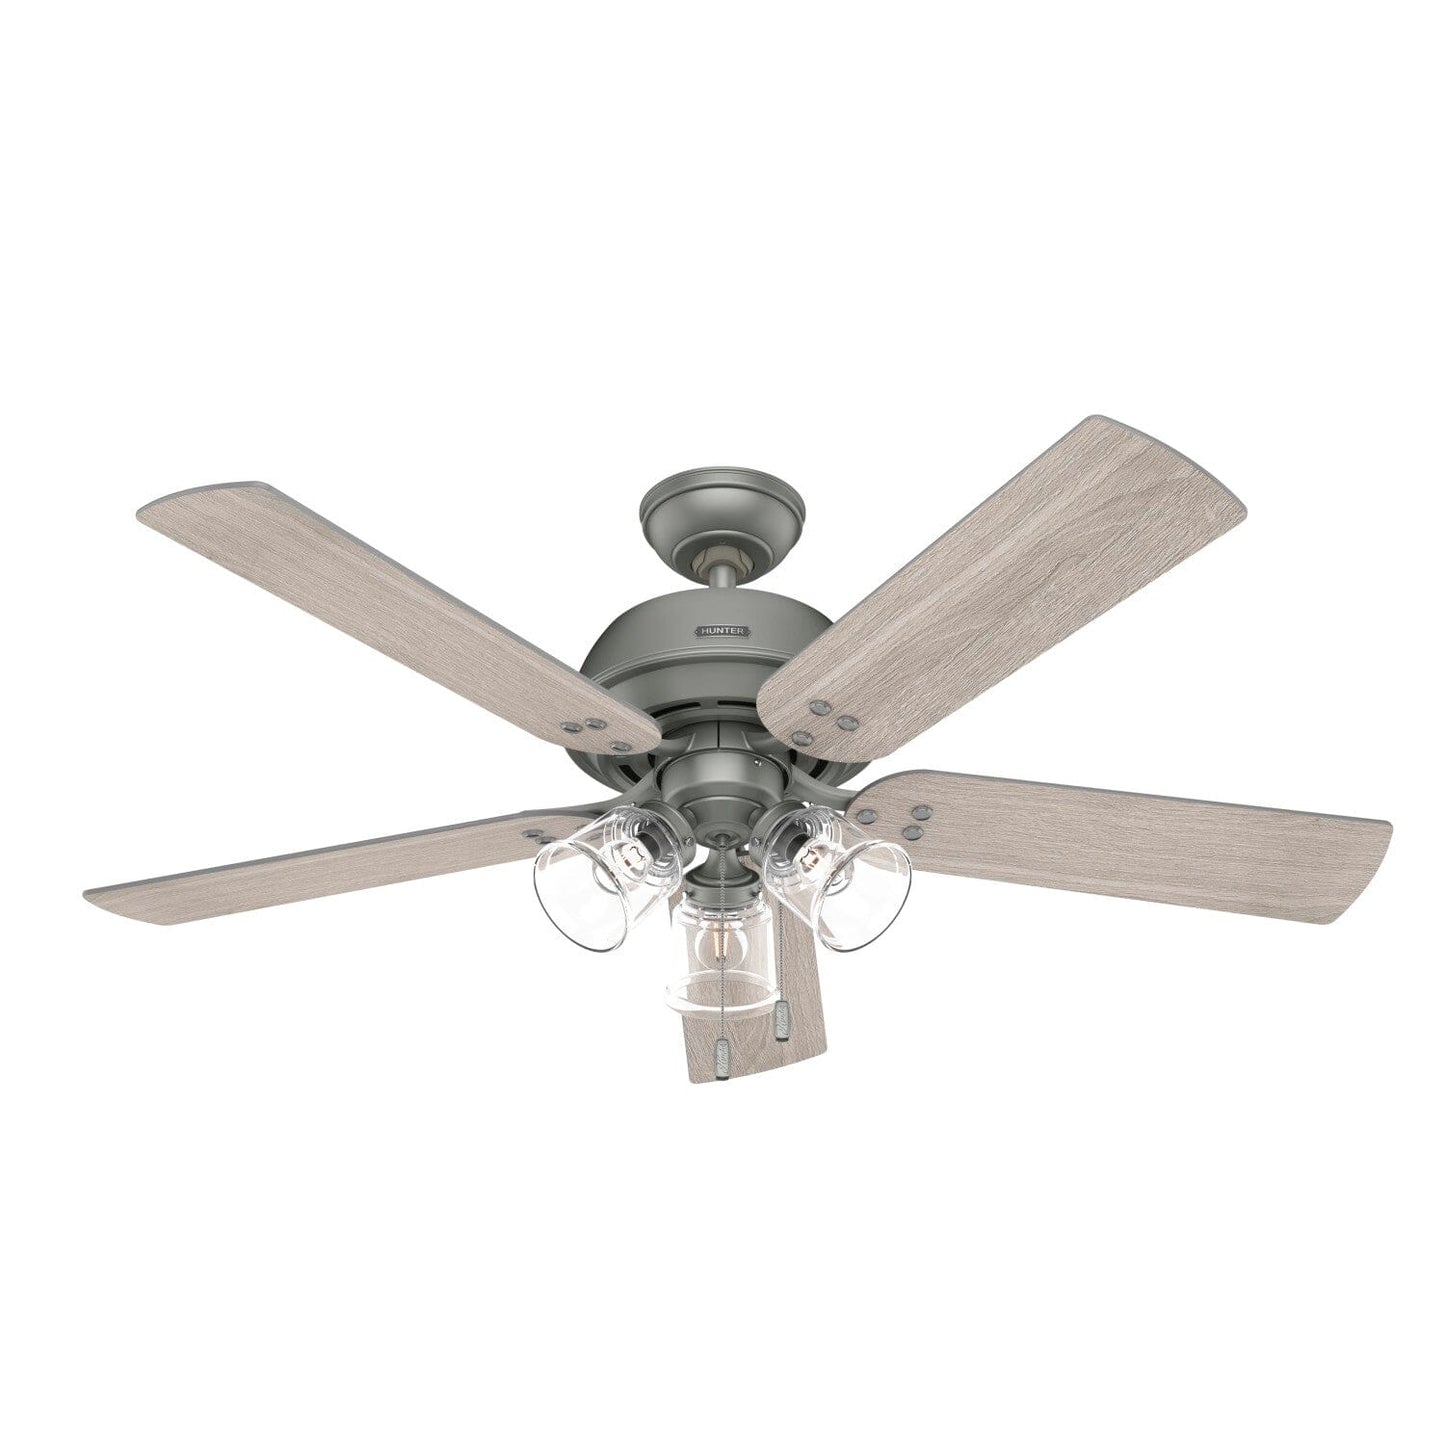 Shady Grove with 3 lights 52 inch Ceiling Fans Hunter Matte Silver - Light Gray Oak 